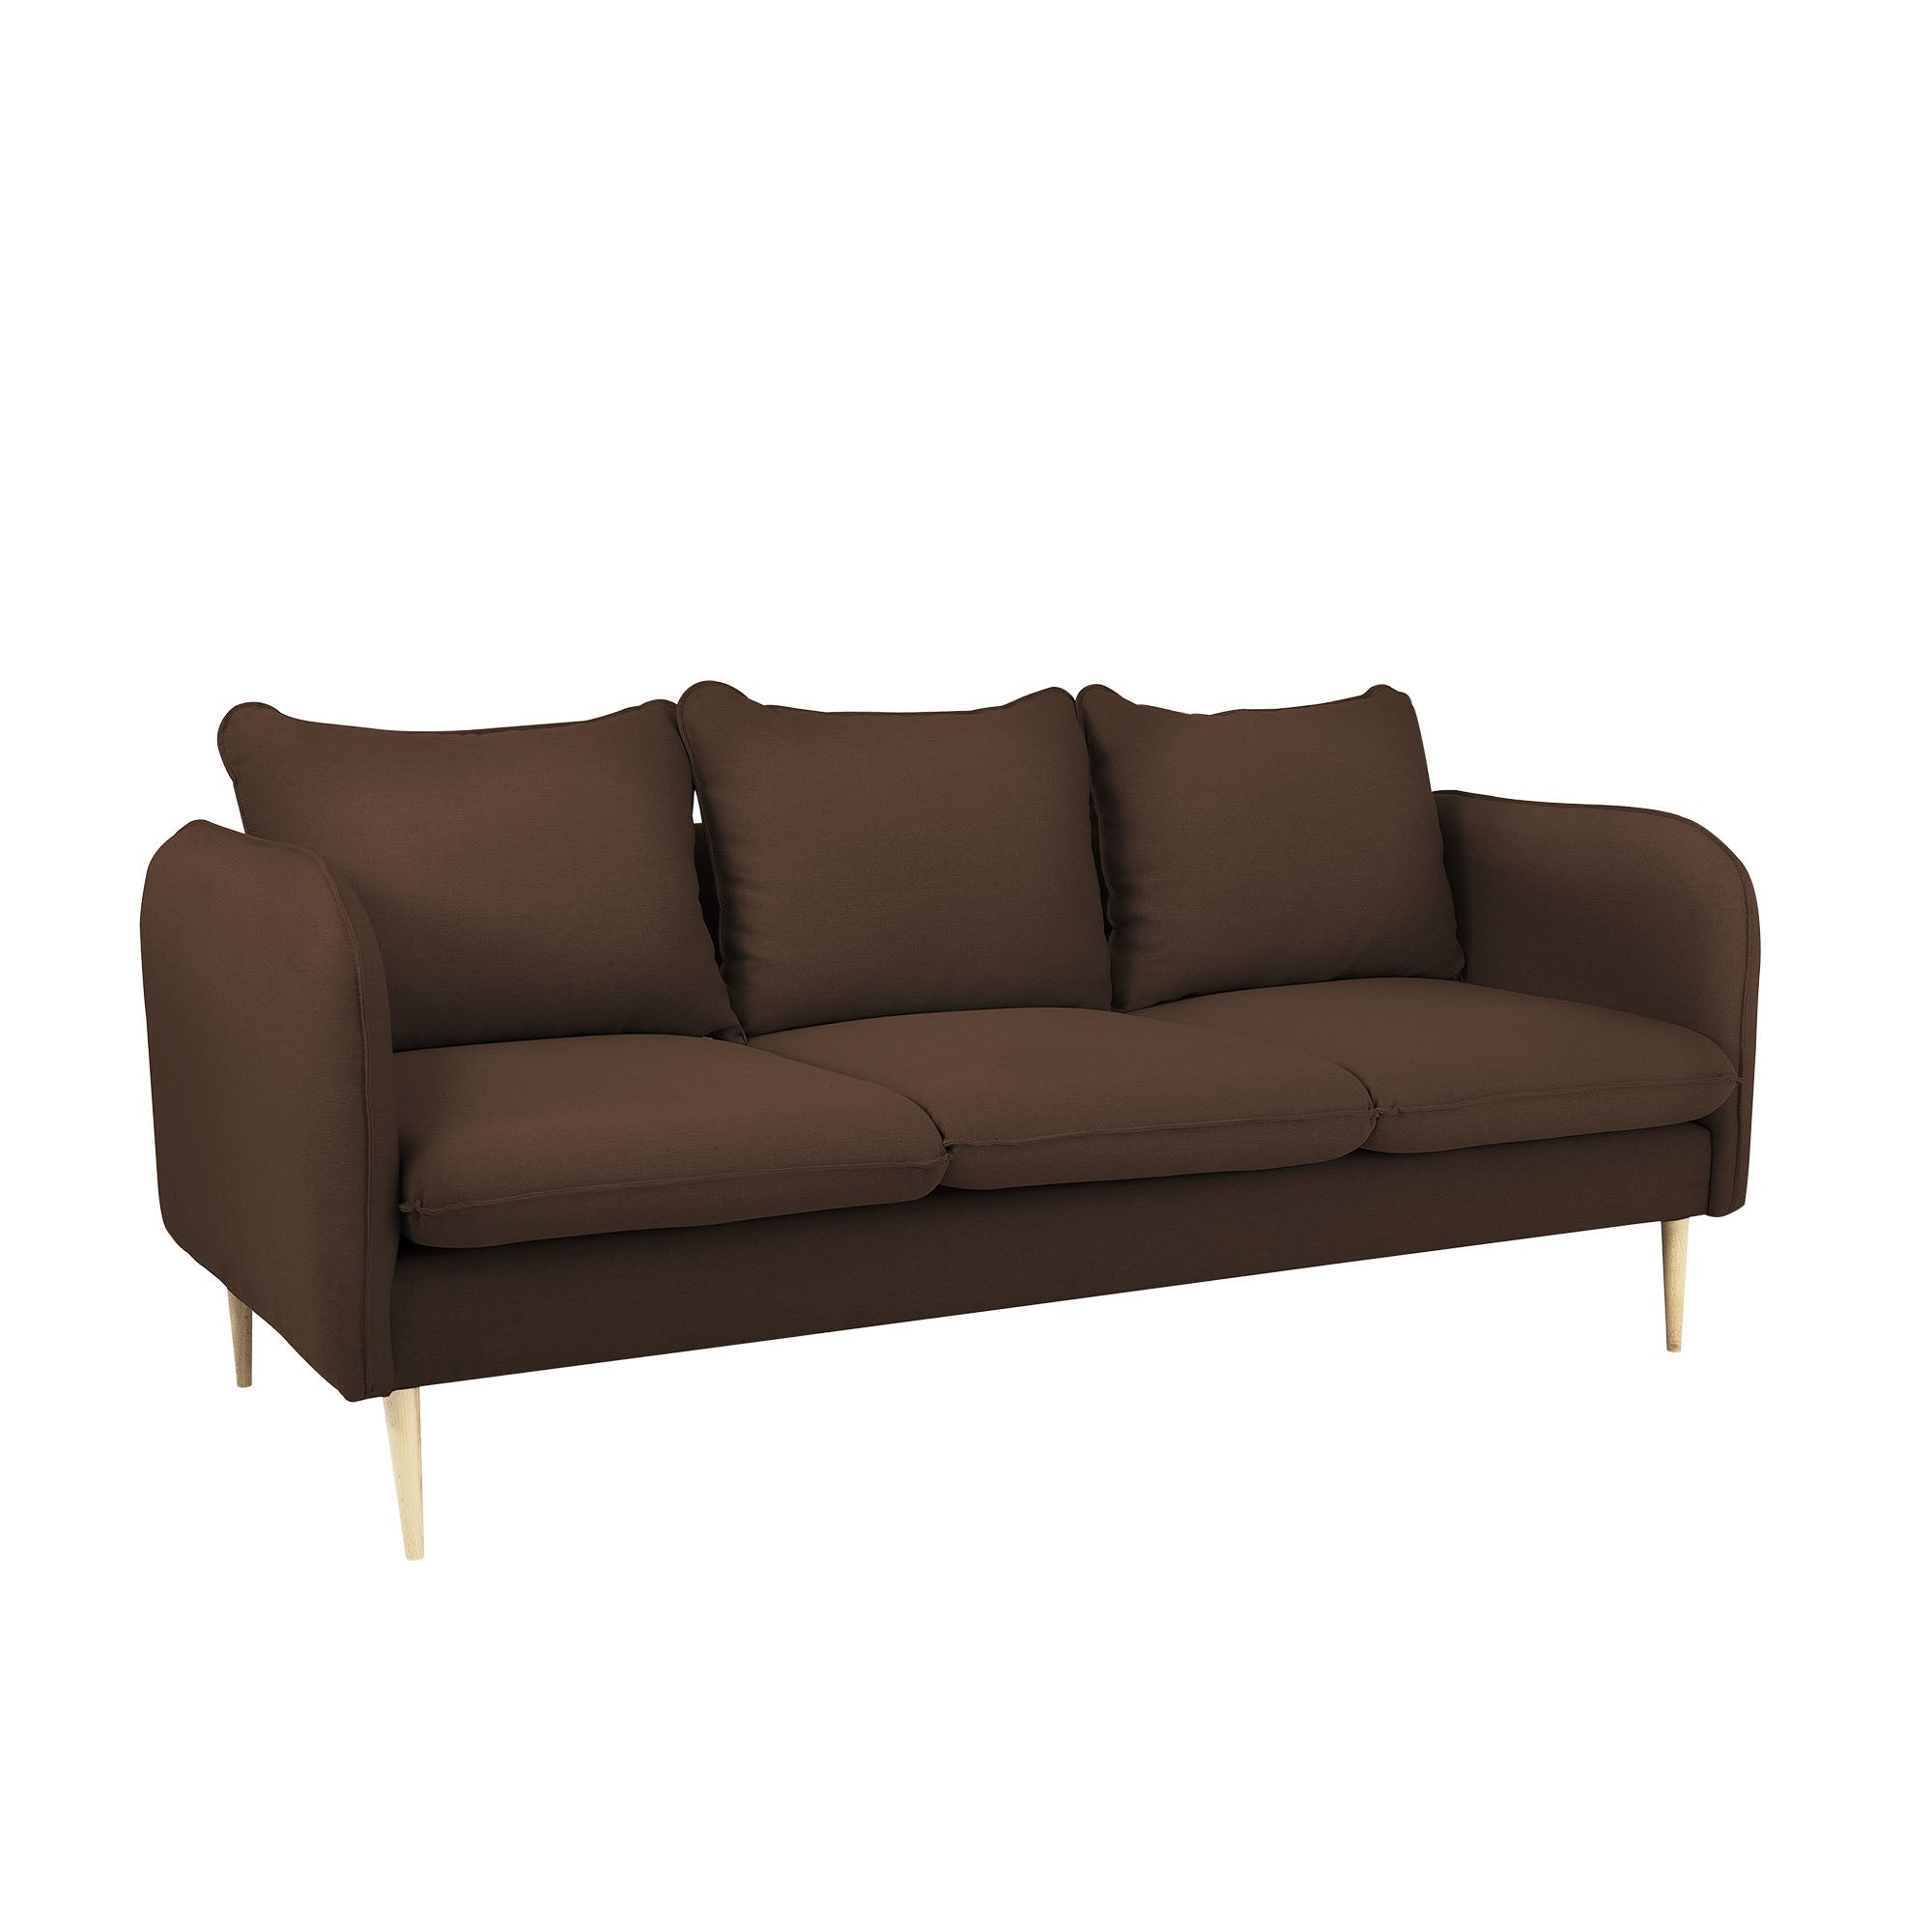 POSH WOOD Sofa 3 Seaters upholstery colour brown white background